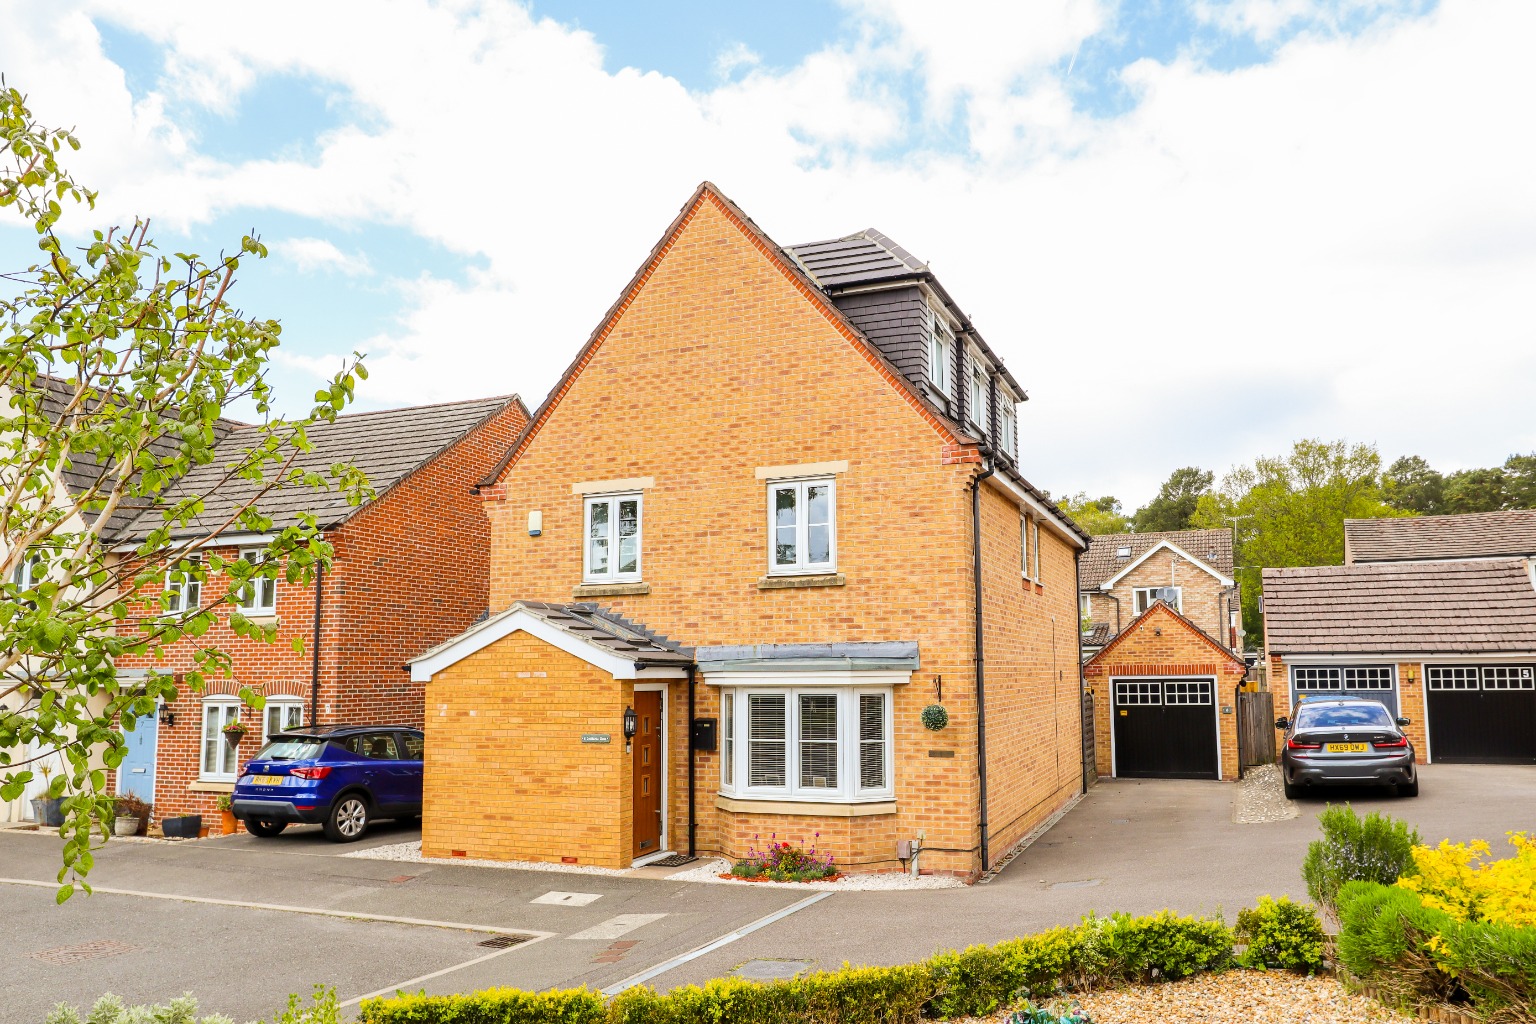 Avocado Surrey is delighted to present to the market, this beautifully presented and recently extended four bedroom detached family home within a quiet cul-de-sac. This stunning property offers four good sized bedrooms, with a large master bedroom suite to the top floor with large en-suite shower